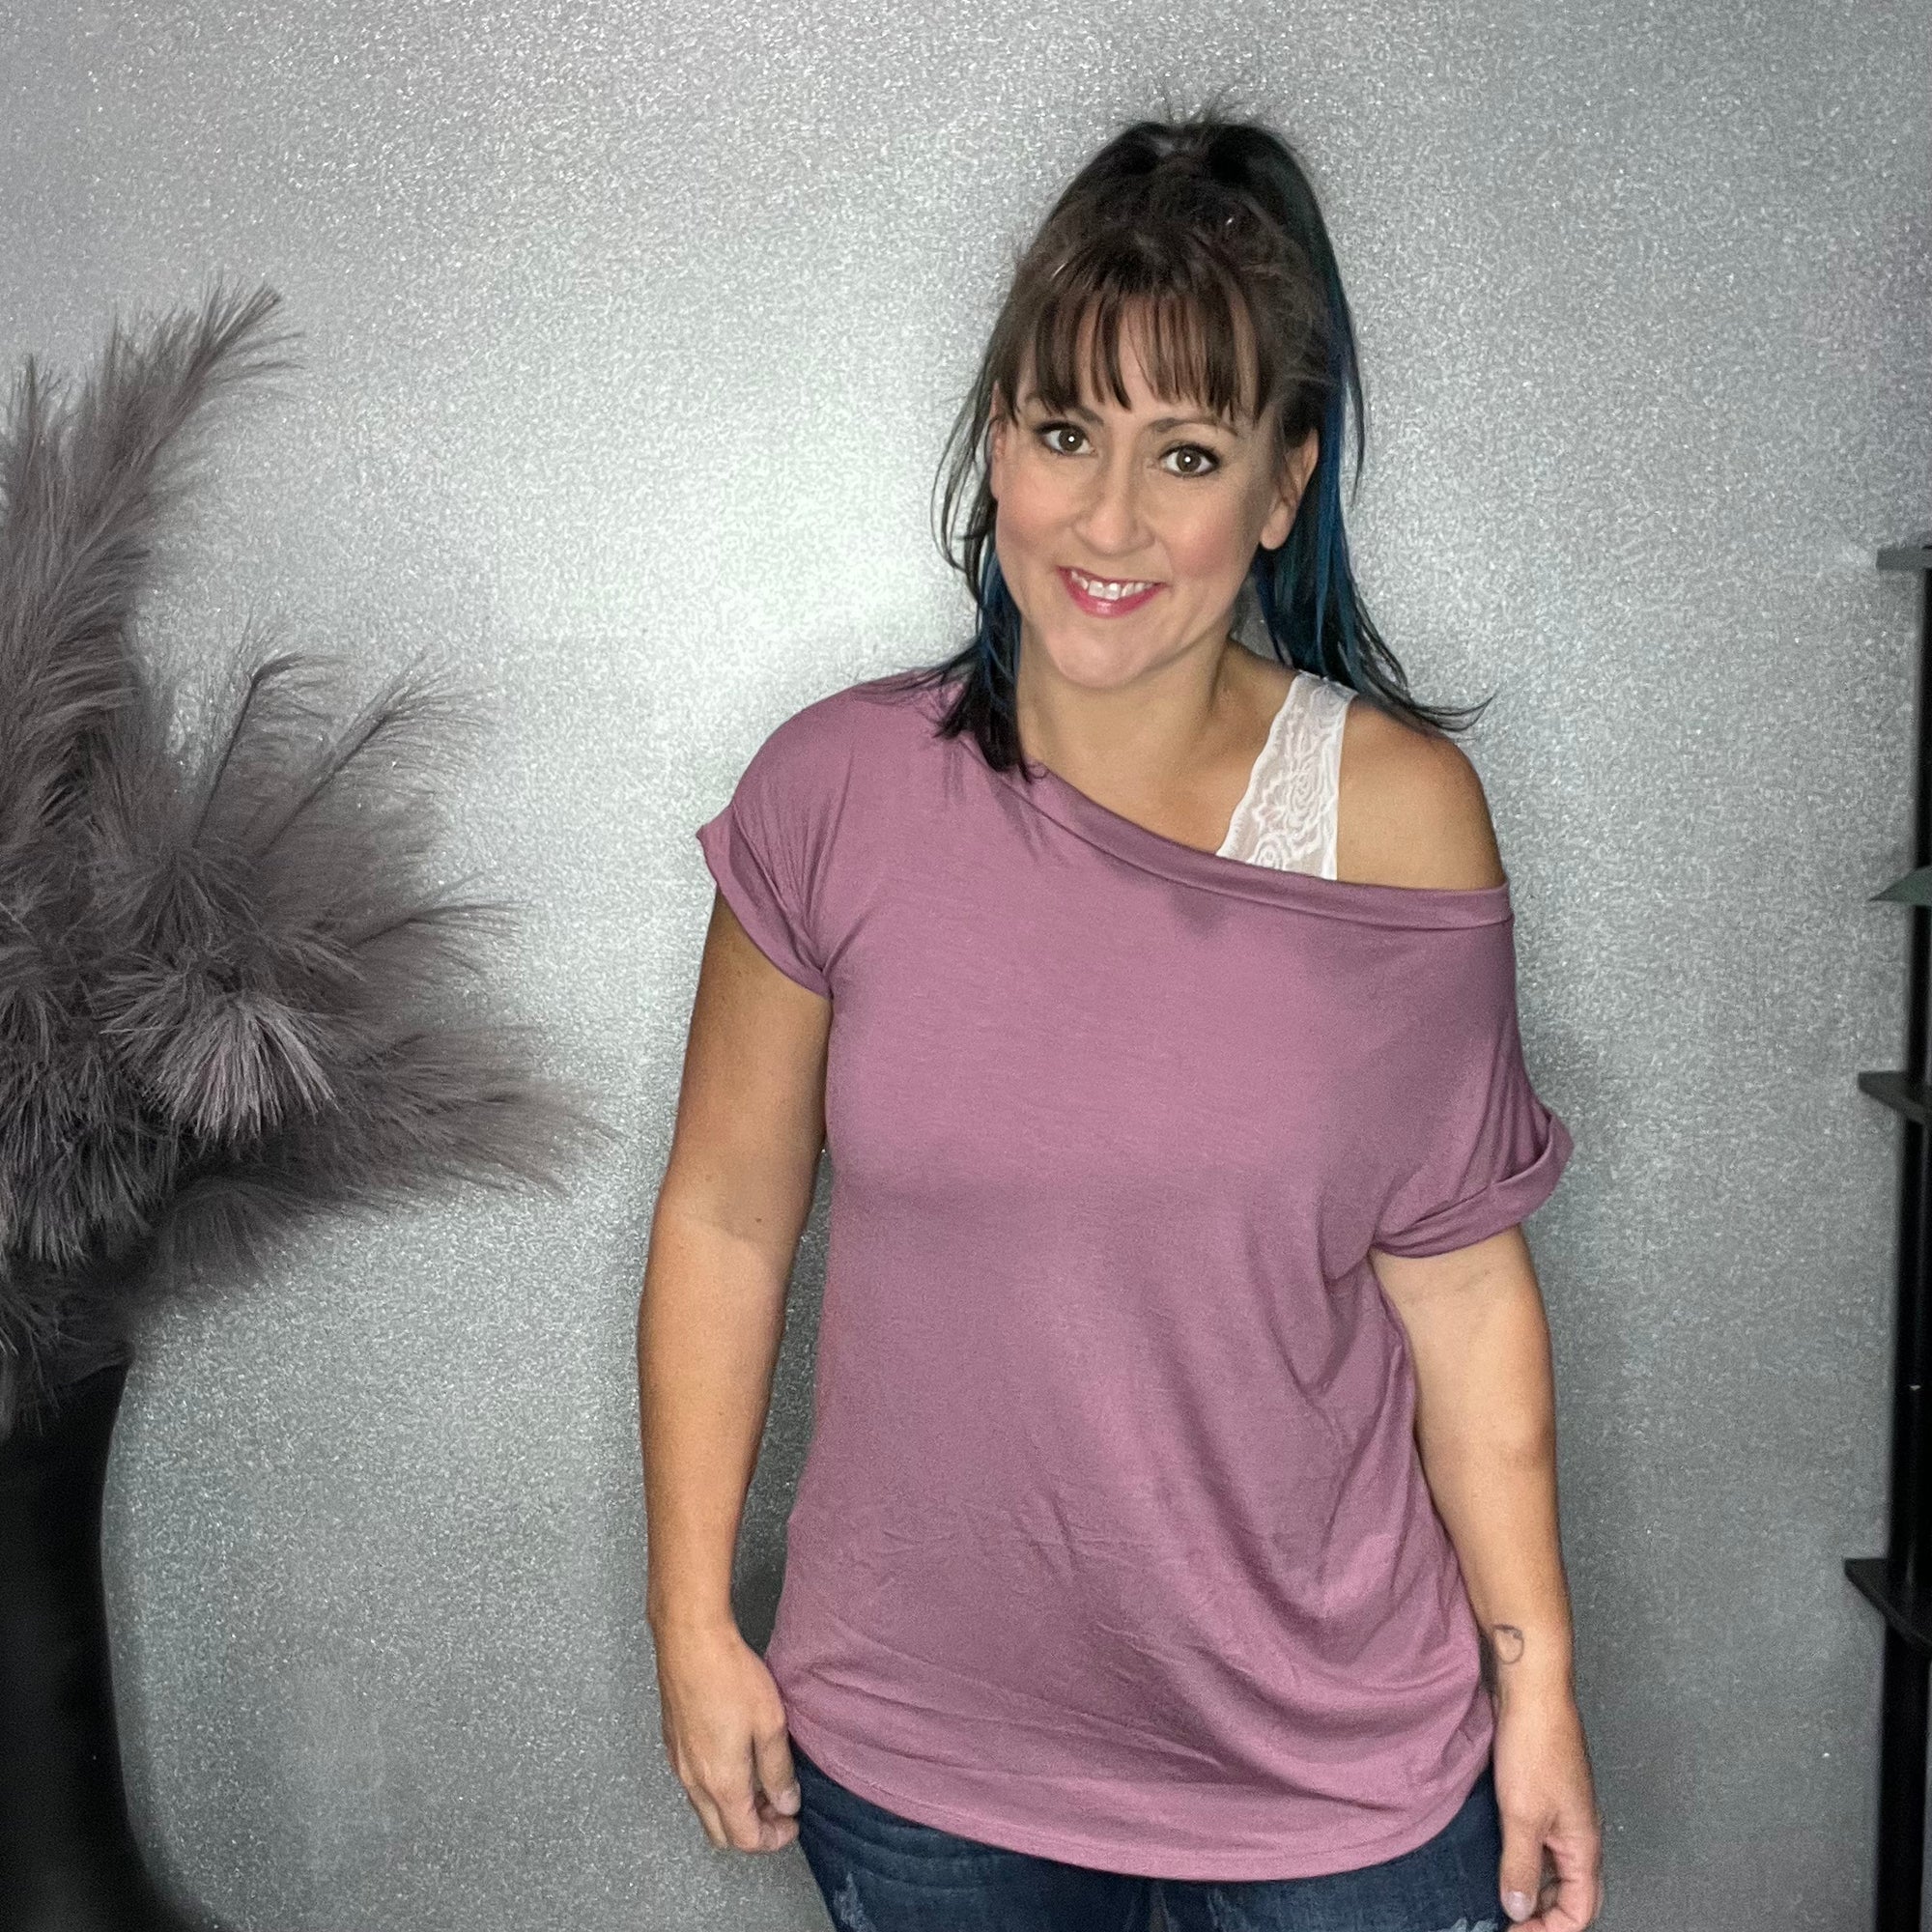 Cuffed Sleeve Top - MORE COLORS